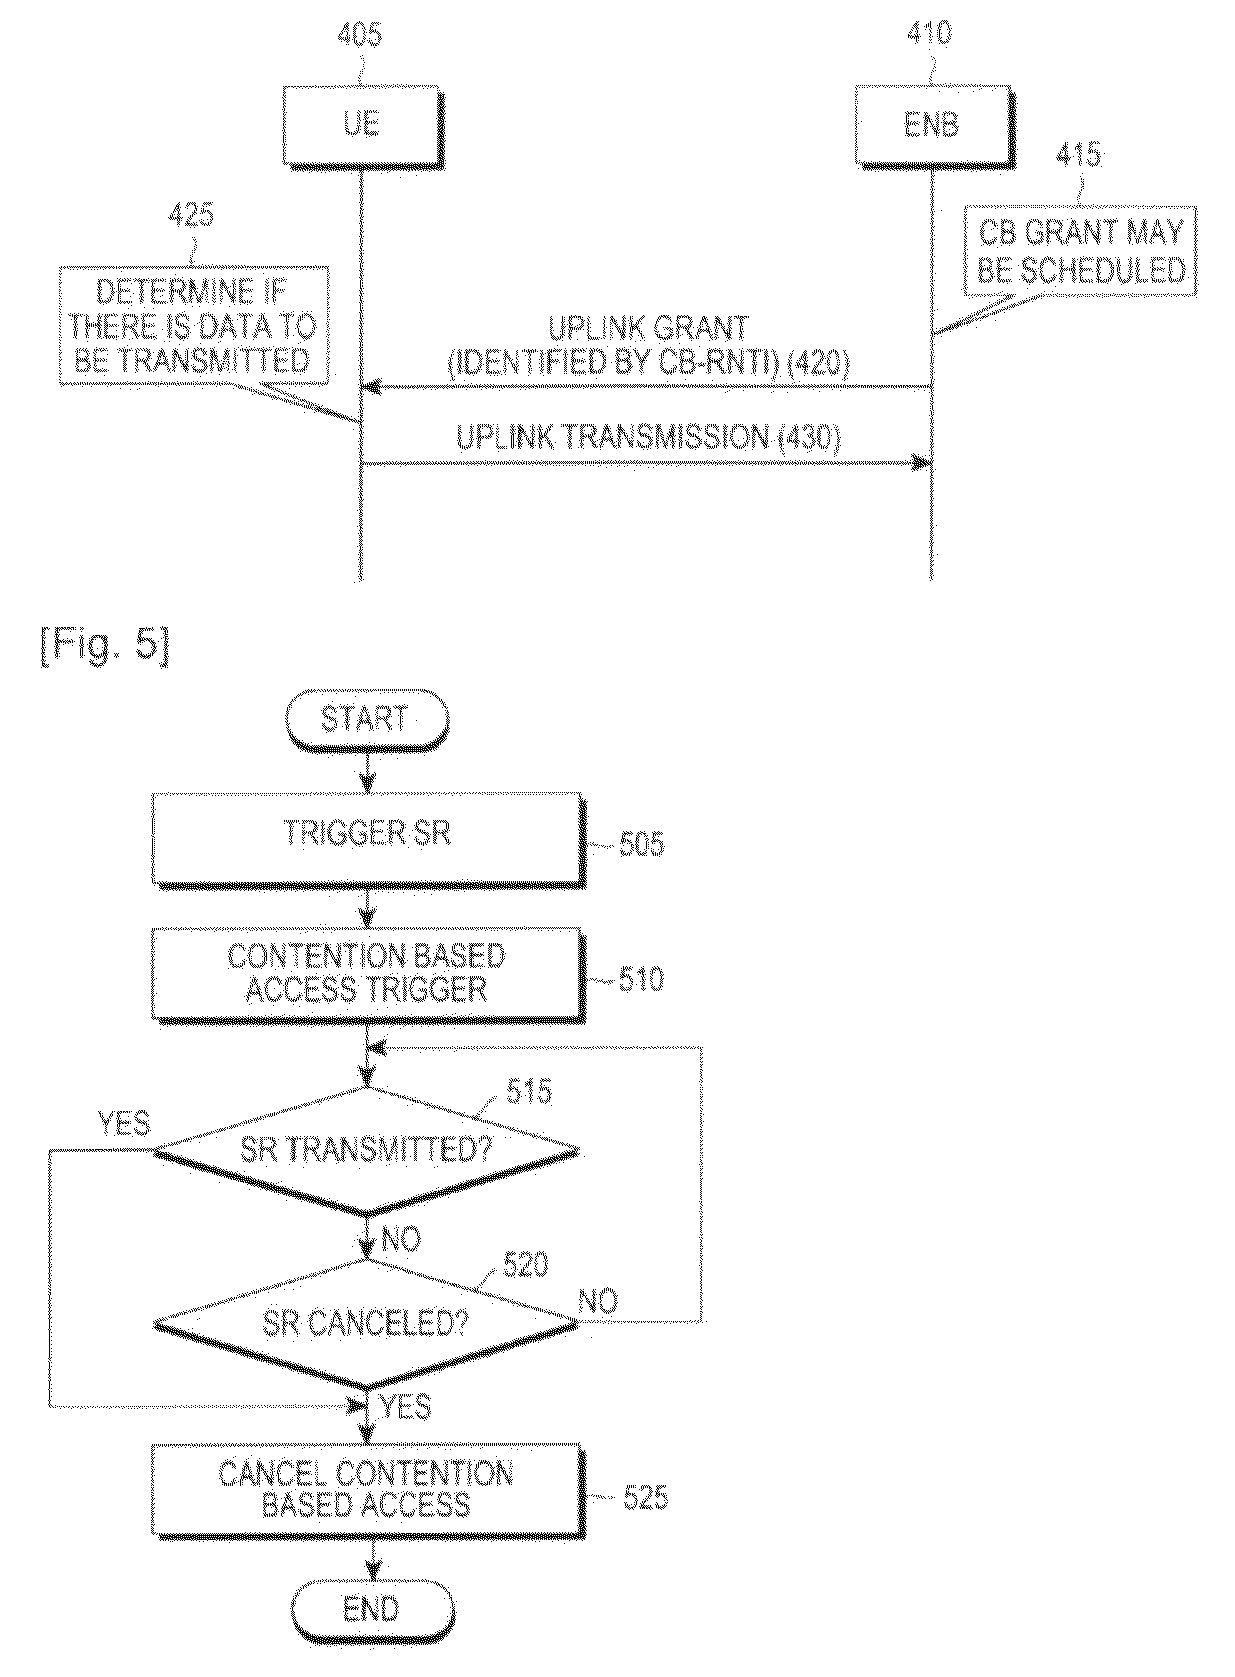 Apparatus and method for performing contention based access in mobile communication system